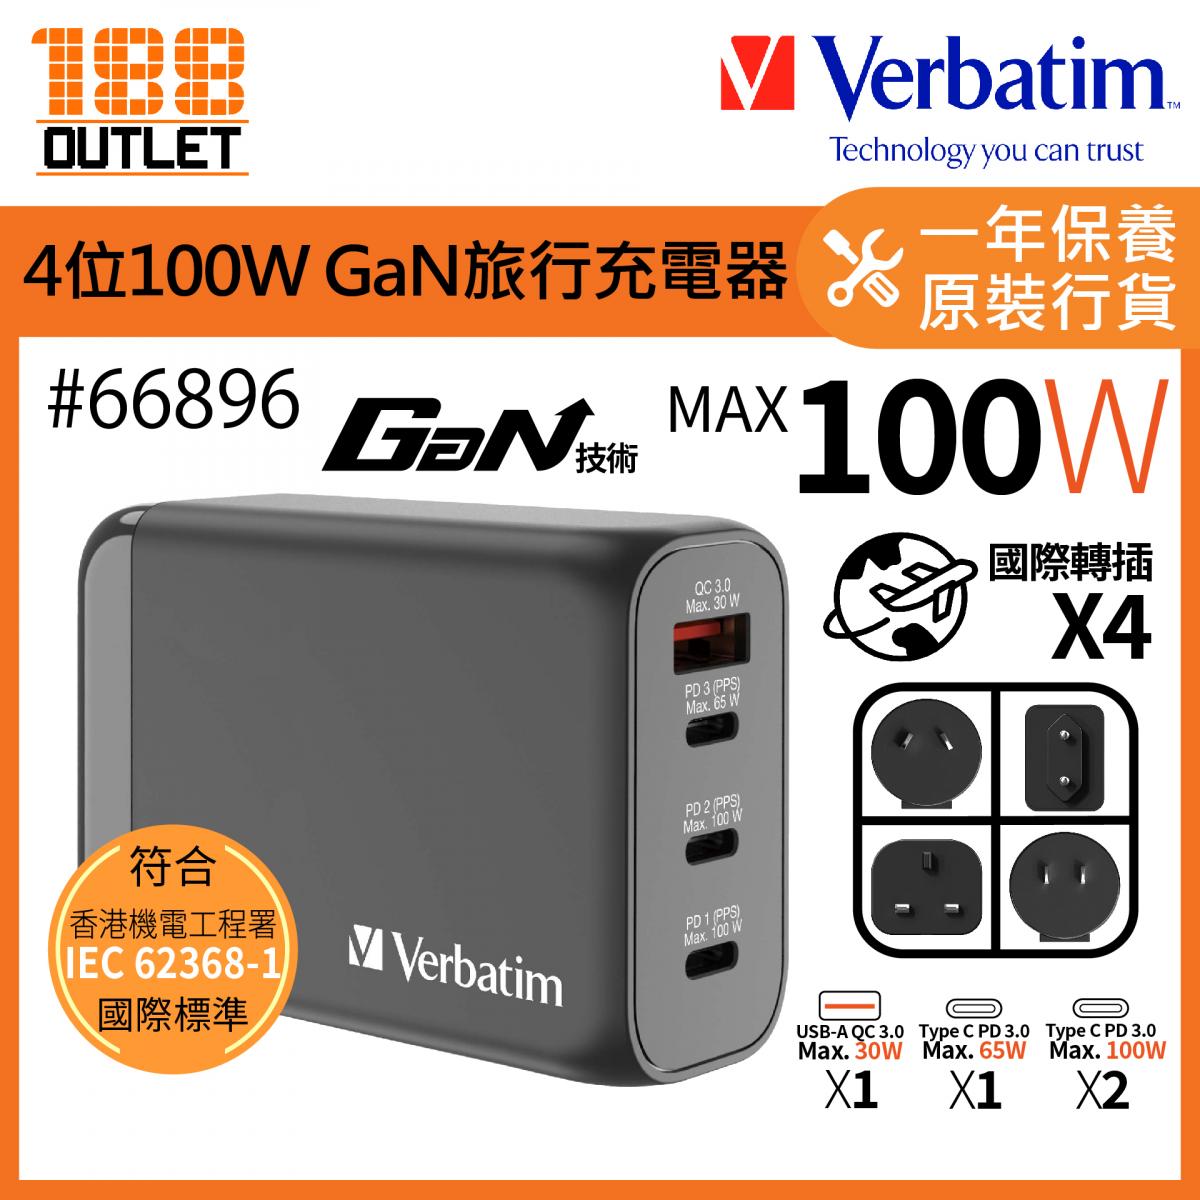 4 Port 100W PD 3.0 & QC 3.0 GaN Travel Charger #66967 [Authorized Goods]